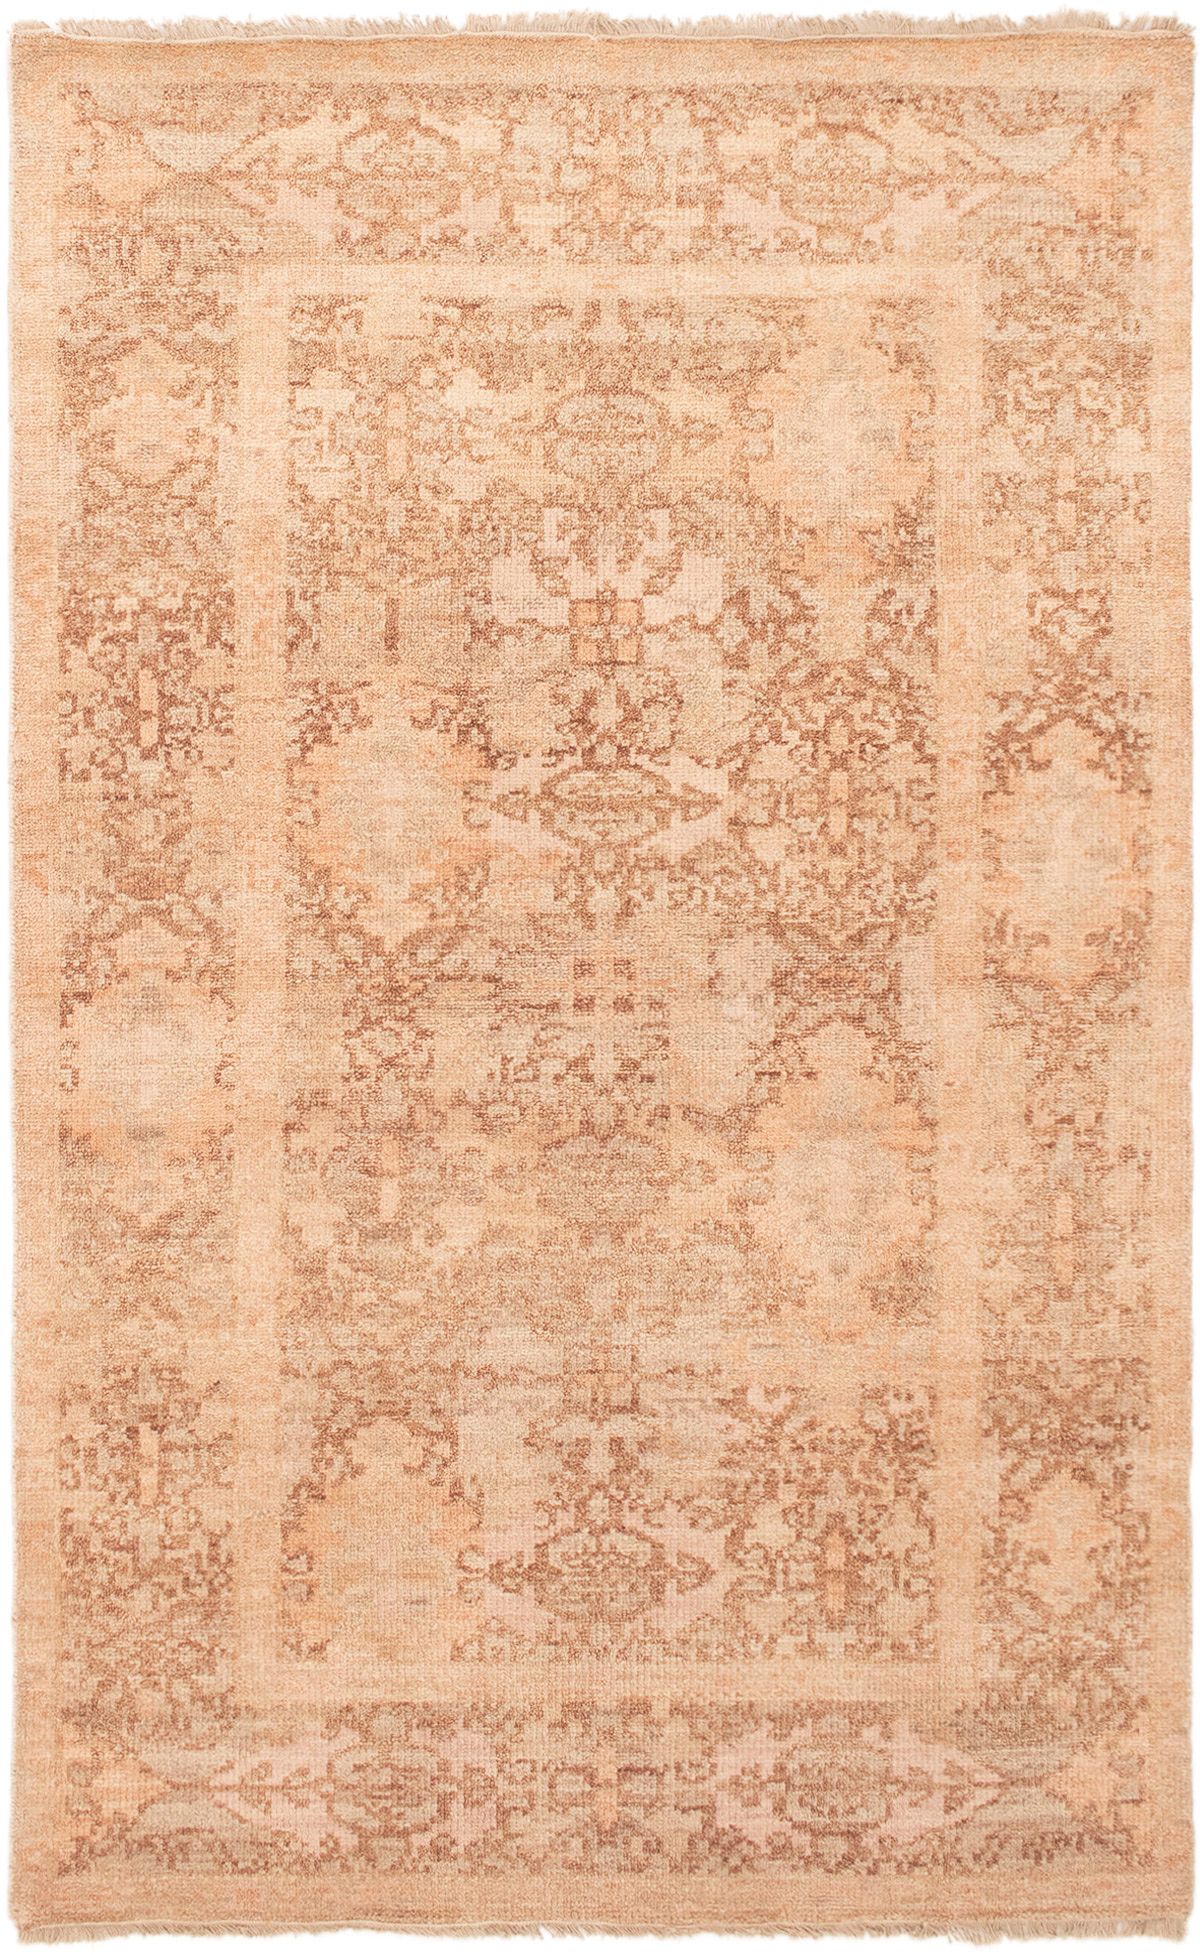 Hand-knotted Eternity Tan Wool Rug 5'8" x 8'2" Size: 5'8" x 8'2"  